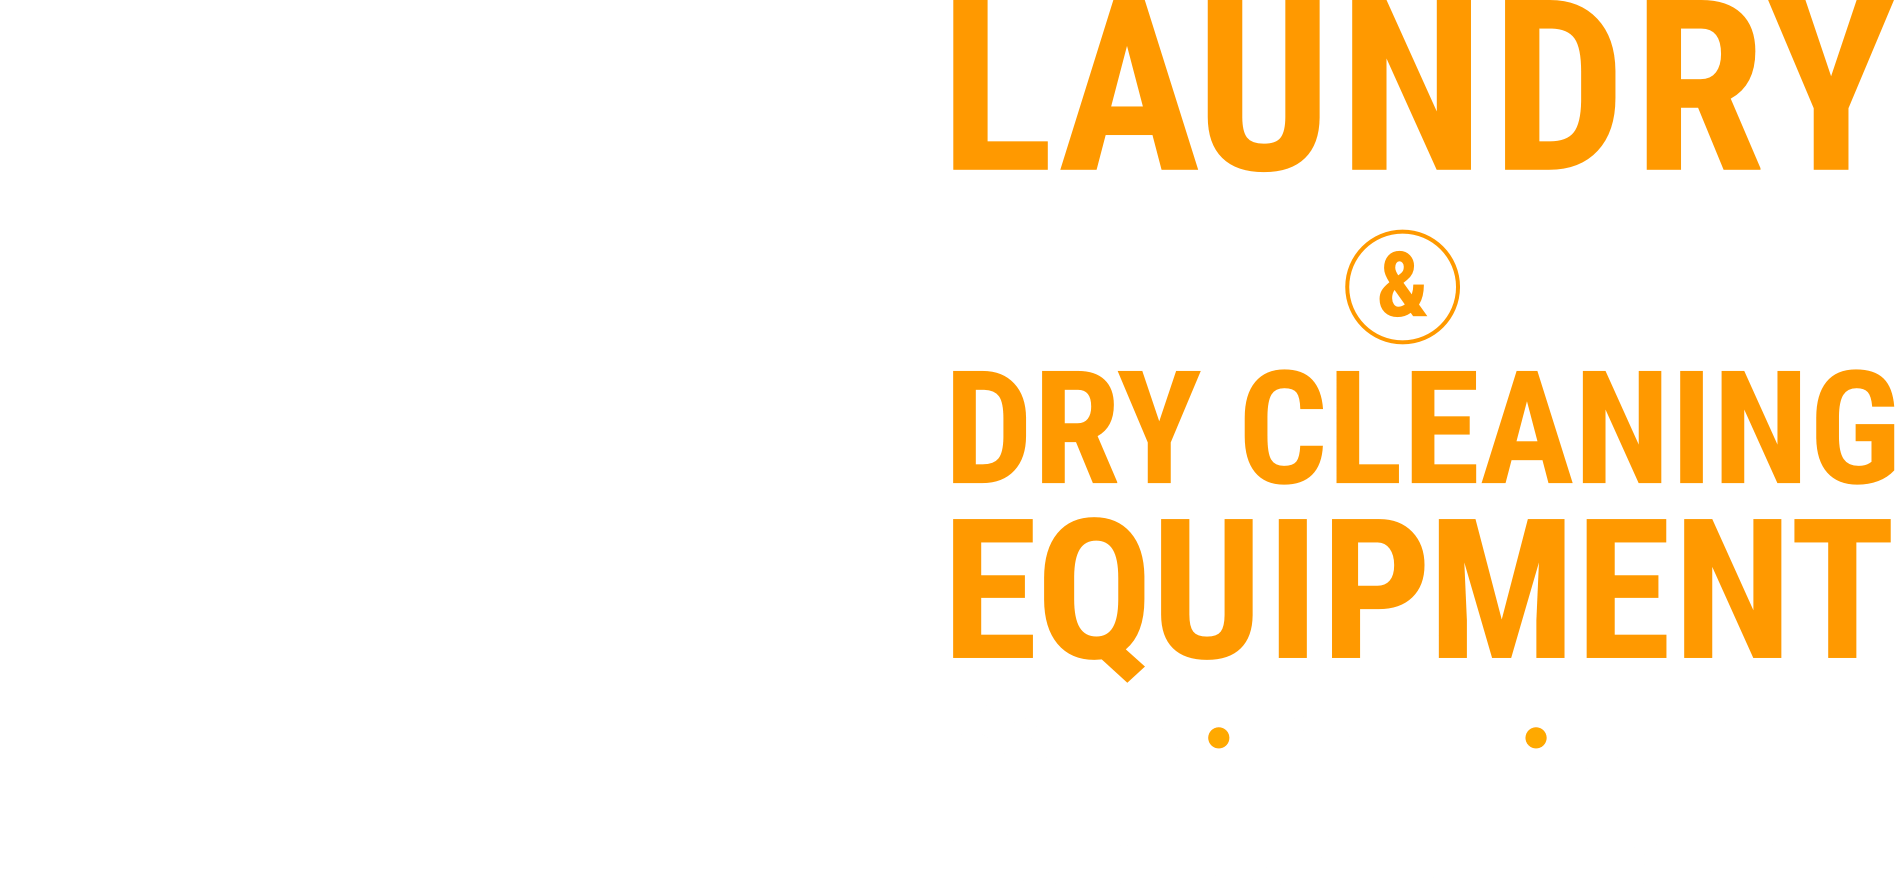 Century Laundry; Laundry & Dry-Cleaning Equipment; Sales, Parts, Service; 100% employee owned